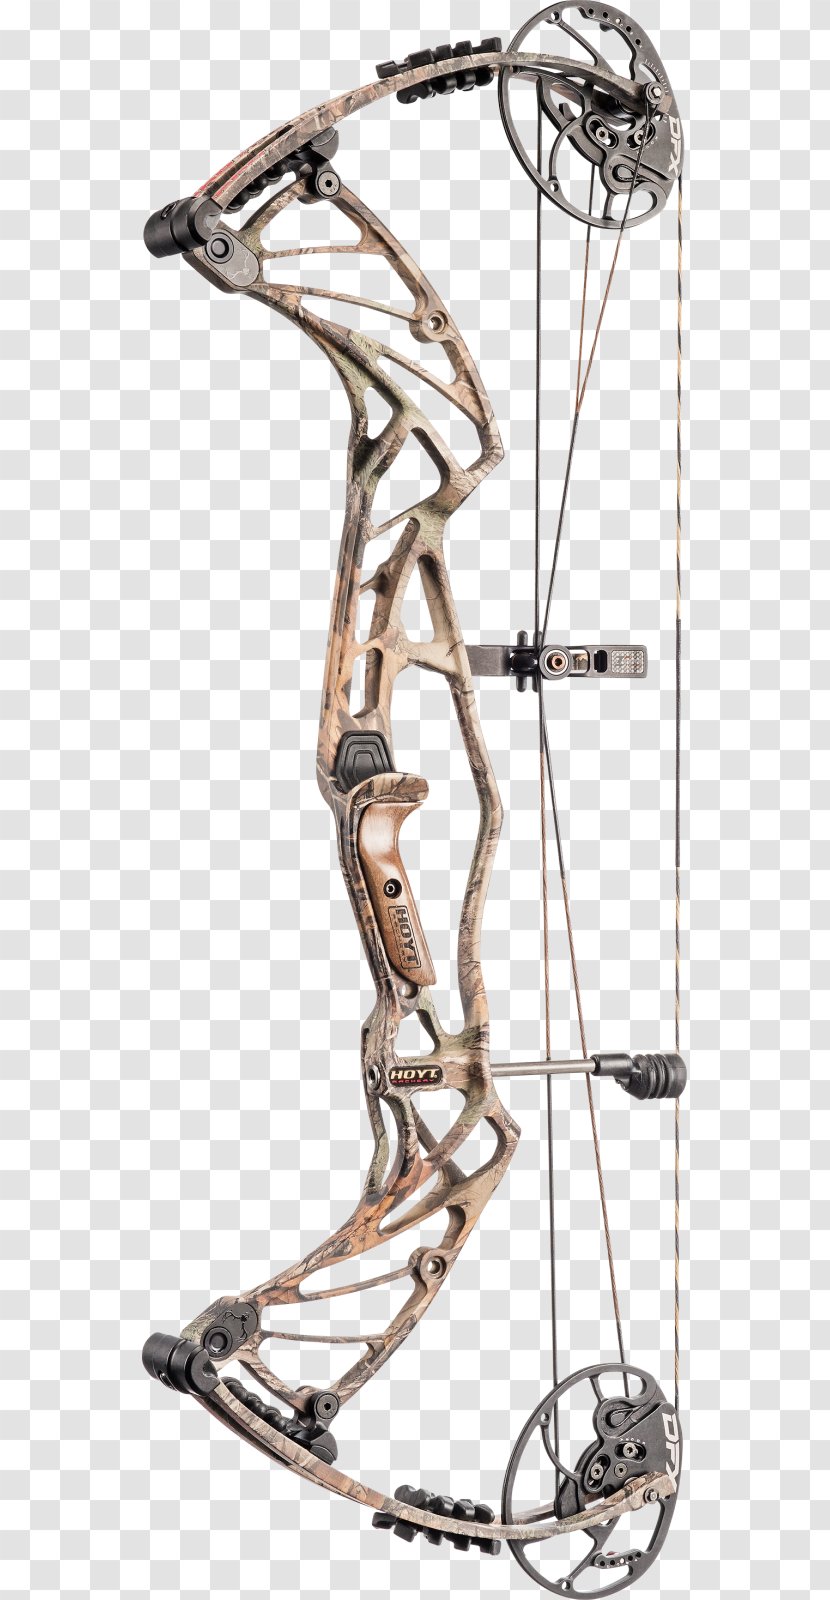 Hoyt Archery Bow And Arrow Bowhunting Compound Bows Transparent PNG